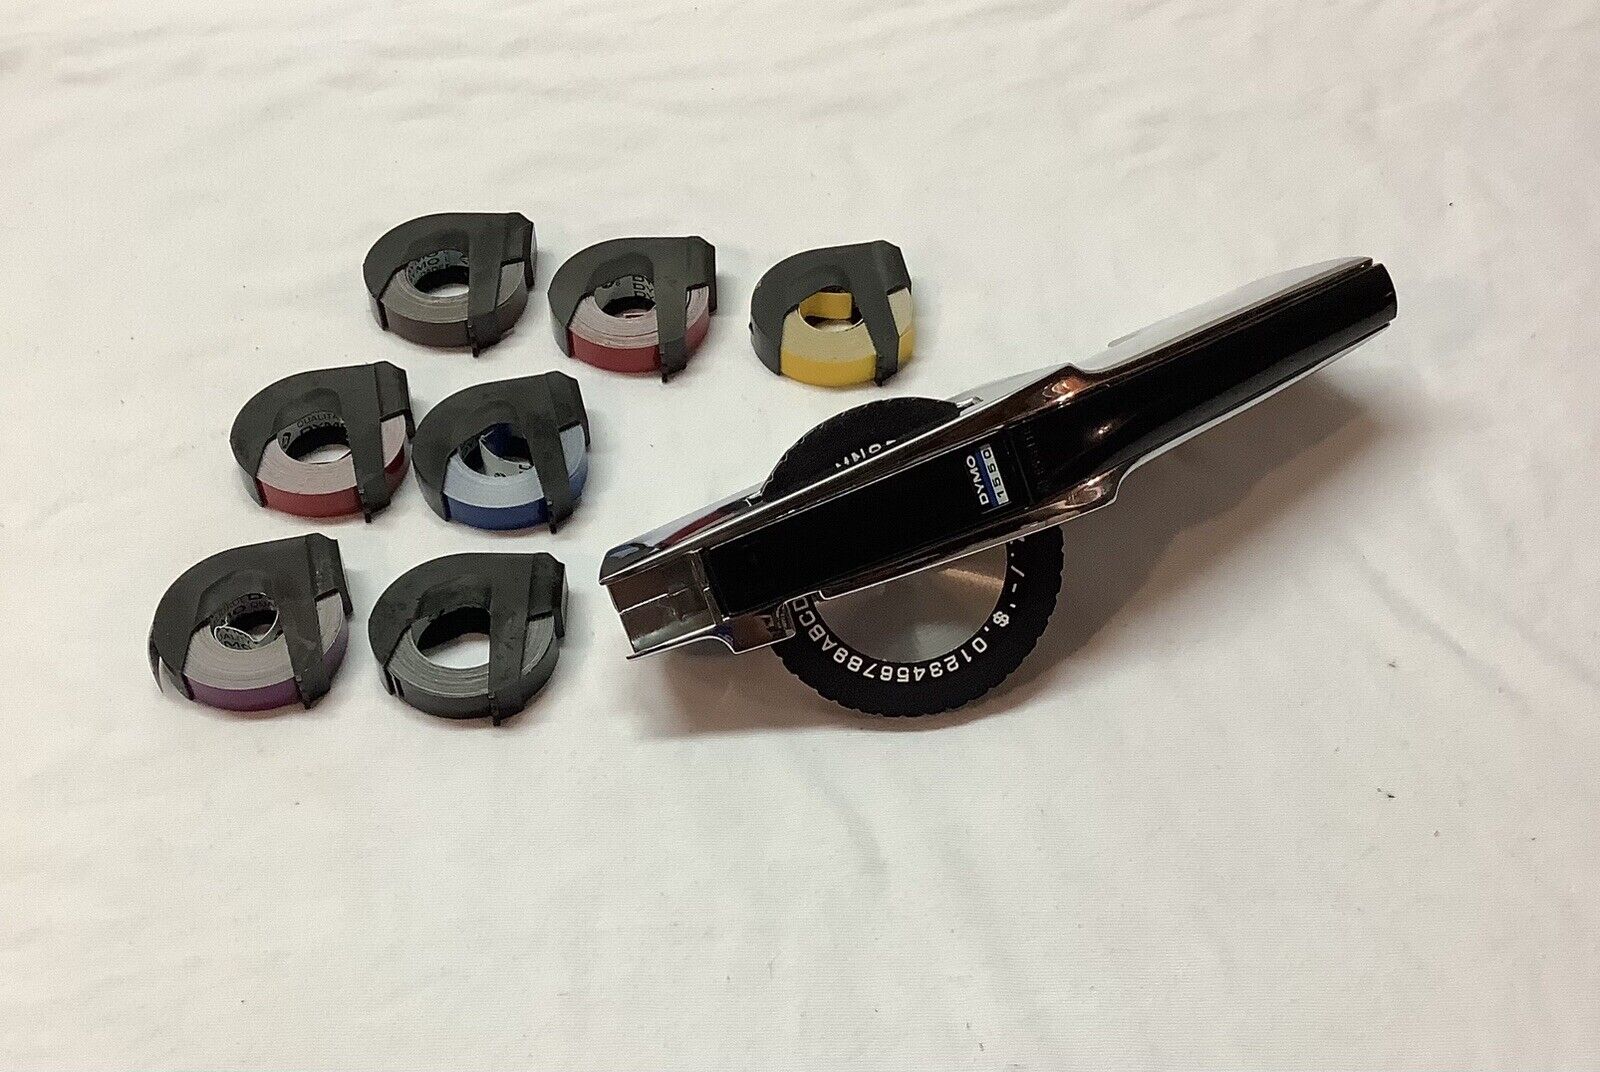 Vintage Dymo 1550 Label Maker. Chrome and Black. Great condition.  Collectible.